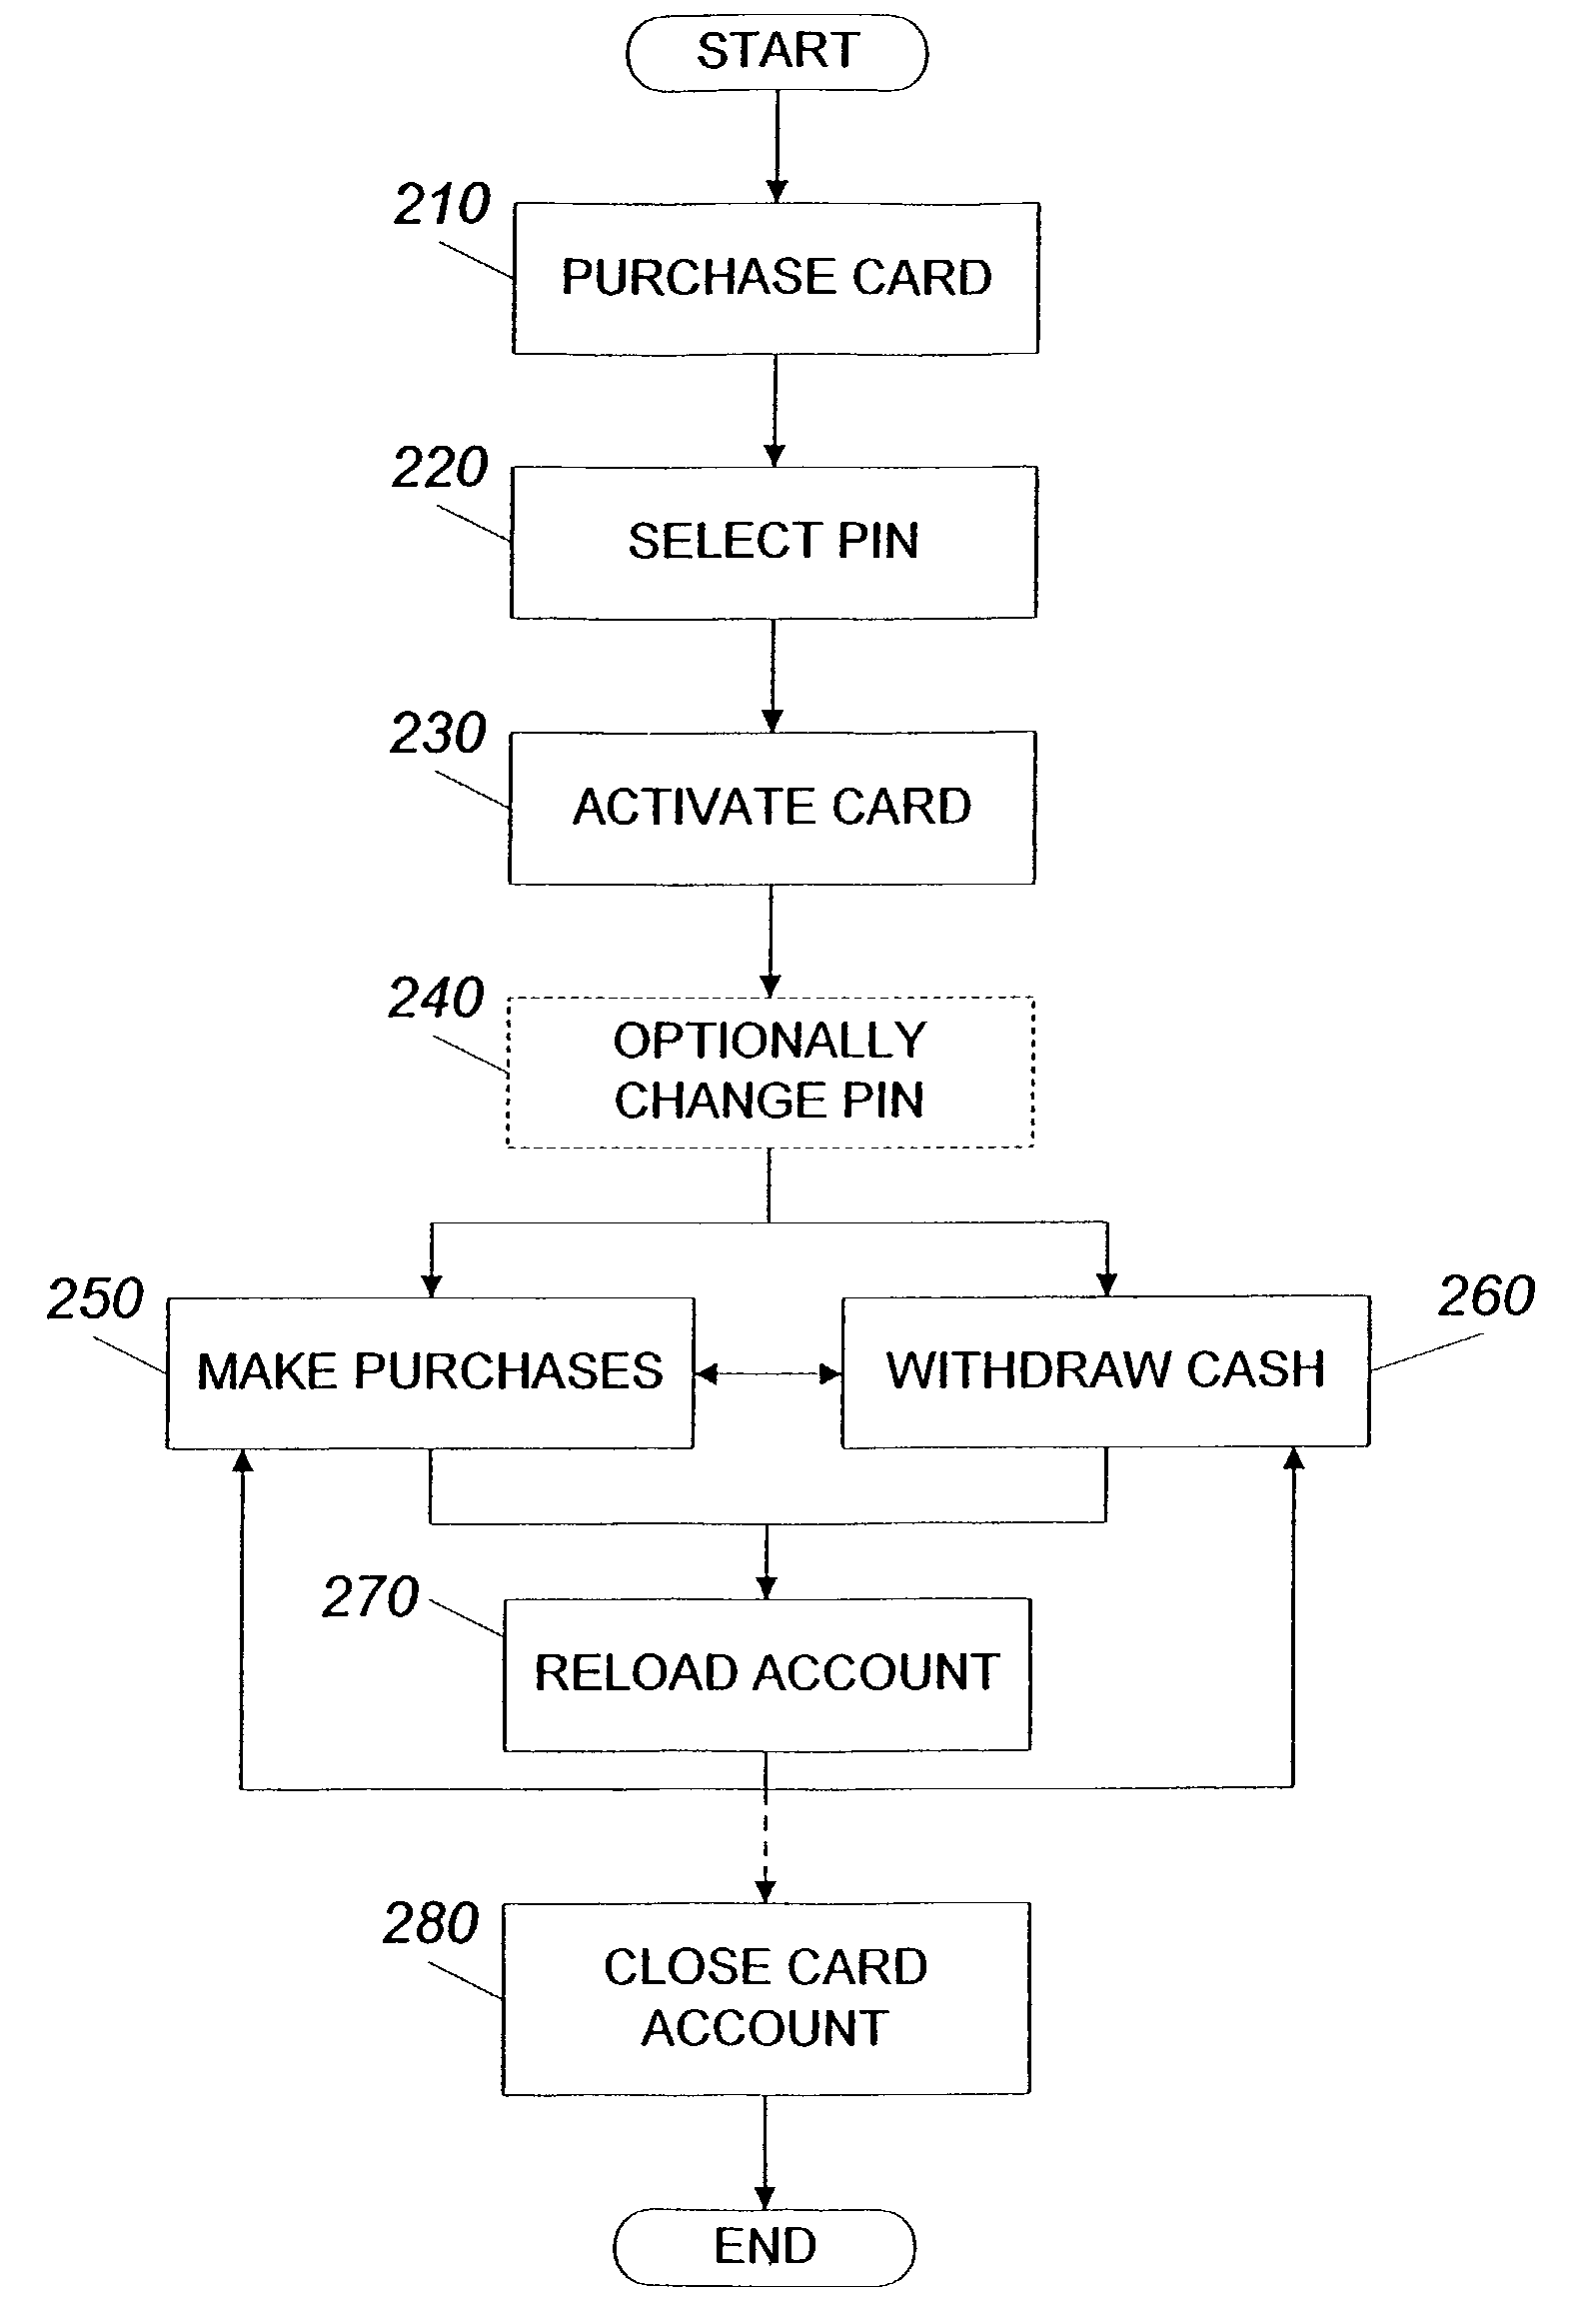 System and method for using a prepaid card